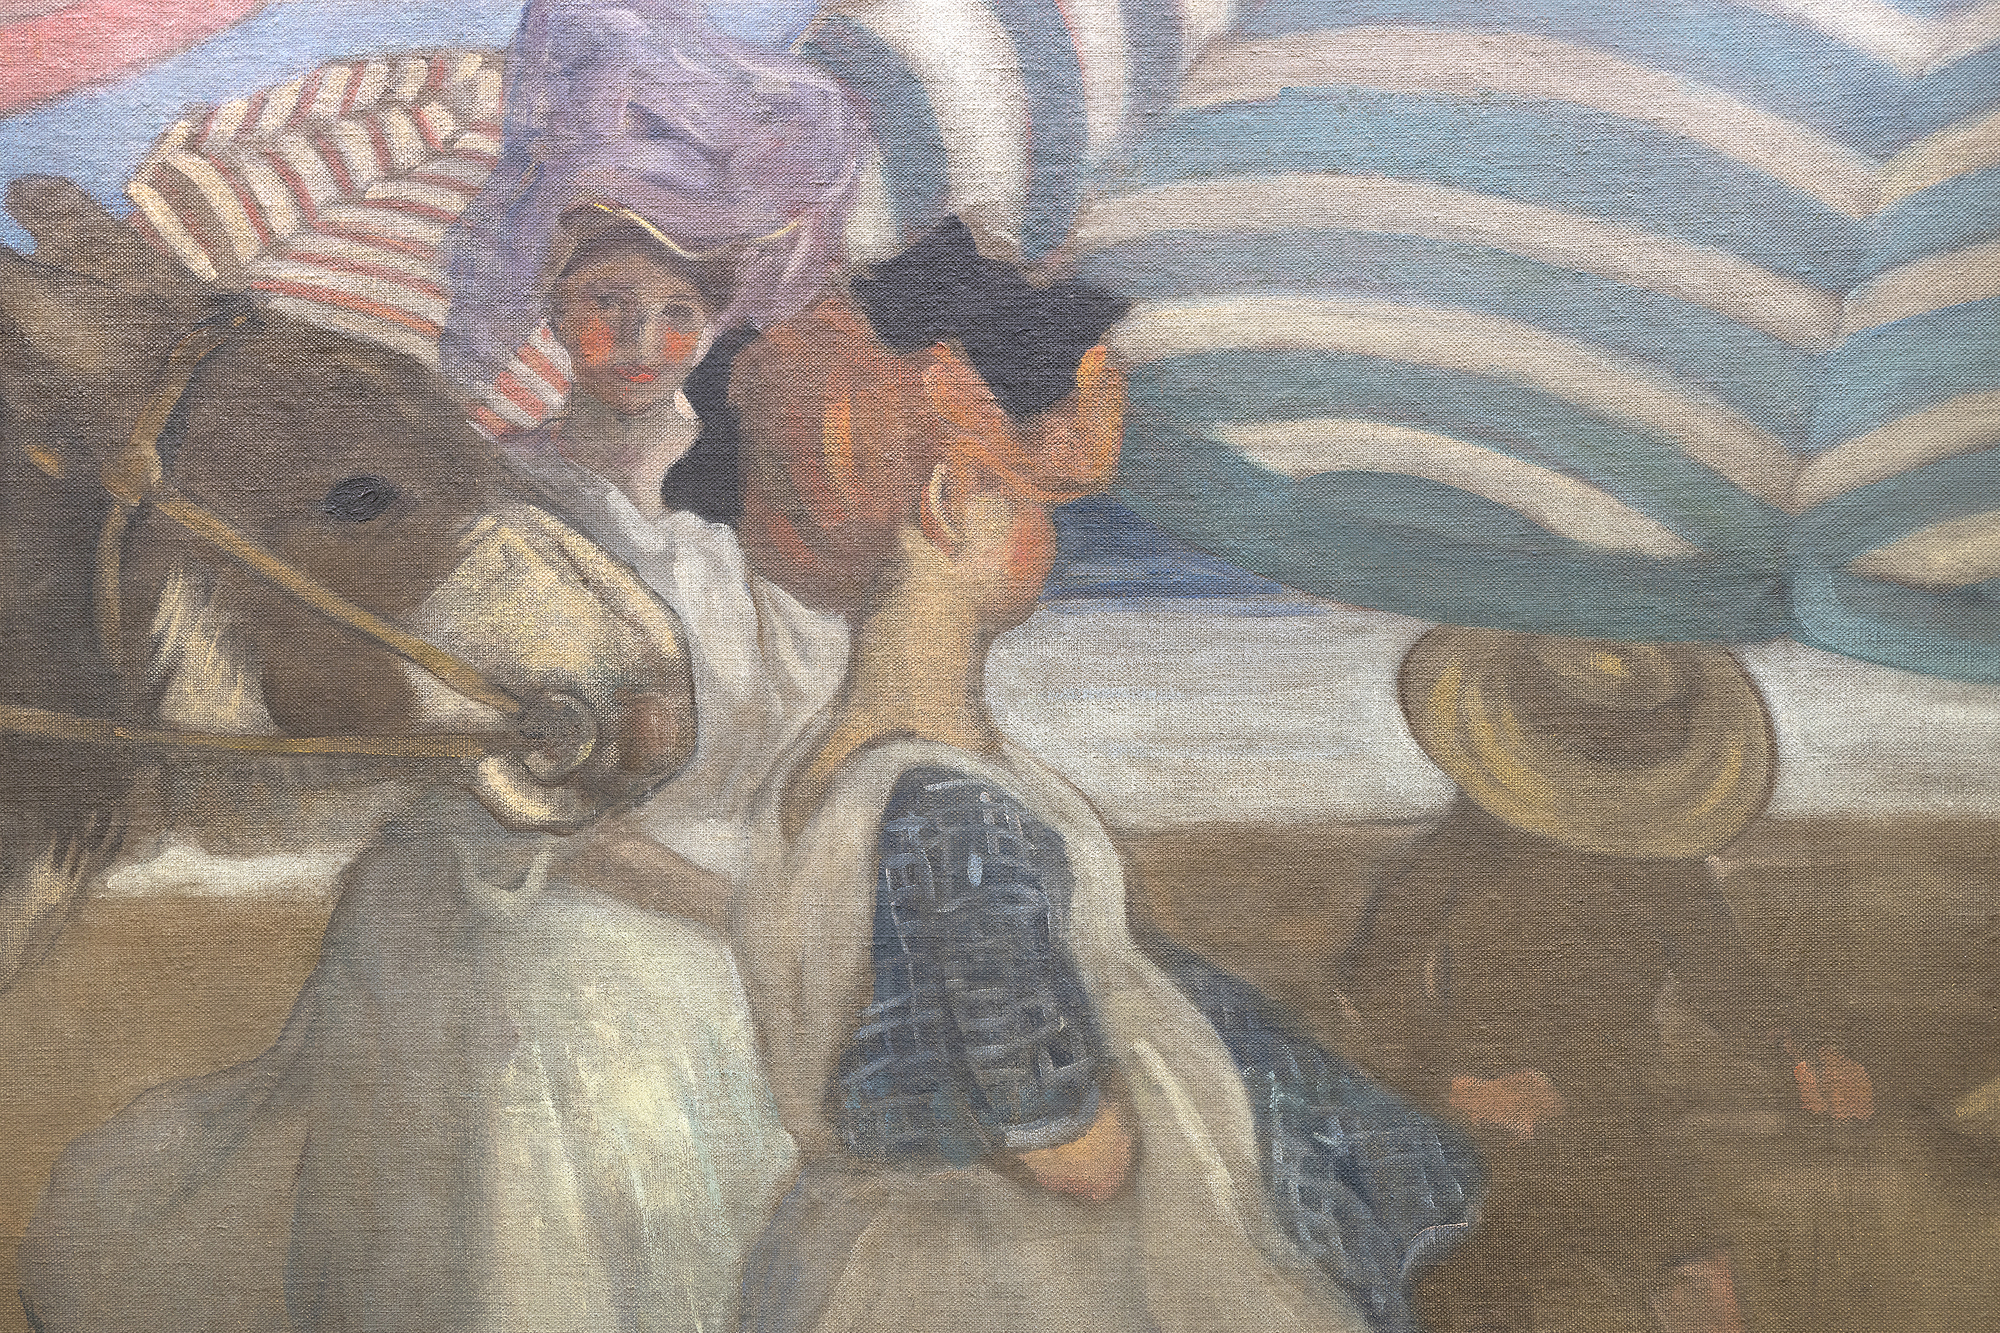 Frederick Frieseke is often regarded as the finest American Impressionist painter of the figure. Yet when he came to study at Académie Juilian in 1898, several les Nabis painters remained a lingering presence, and it was the rich, decorative patterns of Edouard Vuillard and Pierre Bonnard that served as the blueprint for his early success. That influence is clearly demonstrated in the unrestrained repetition of the voluminous, pleated, striped umbrellas of Afternoon at the Beach, a canvas mural installed in the opulent Hotel Shelburne dining room overlooking the Atlantic City Boardwalk. The unifying impact of that repetitive element imbues the setting with cloud-like loft within a color scheme, evoking Vuillard and the richness of a Gobelin tapestry, rather than the effect of sunlight and broken color that mark his more familiar paintings from the decade of 1910 to 1920.<br><br>Afternoon at the Beach was installed under the artist’s direction in February 1906. It remained on view for decades at the swanky hotel that enticed “Diamond Jim” James Buchanan Brady to pay one thousand dollars a week for permanent residence and was an unfading memory for throngs of well-heeled socialites, financiers, and notables from Irving Berlin to John Philip Sousa and Ethel Barrymore to Al Jolson. Undoubtedly, its presence high on the grand dining room wall contributed to the artist’s popularity and renown.<br><br>Today, we may look upon this long, frieze-like composition as a delightful fin-de-siécle costume study or an informative expose of Victorian mores as suggested by the separate spheres of gender groupings. But mostly, Afternoon at the Beachrecounts the artist’s unbridled delight and appreciation of women, here, expressed within familial, maternal, and social contexts. It is the subject and theme that brought Frieseke acclaim and awards on both sides of the Atlantic and which, to this day, endears him to the many who count him among the most beloved of American figurative painters.